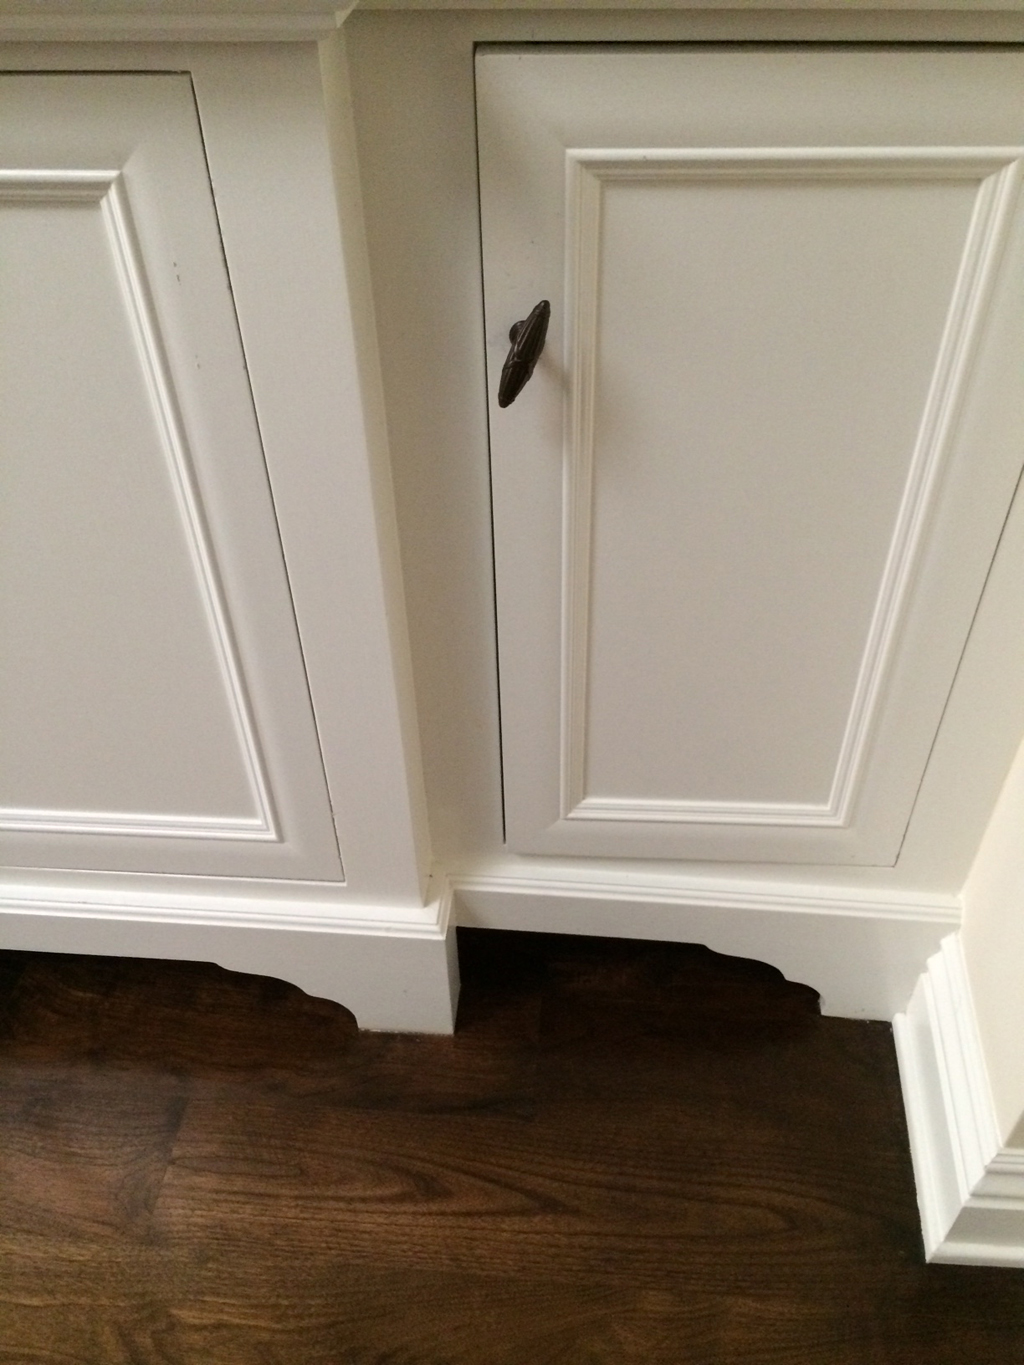 Custom linen closet with custom leg detail and beam & crown at ceiling